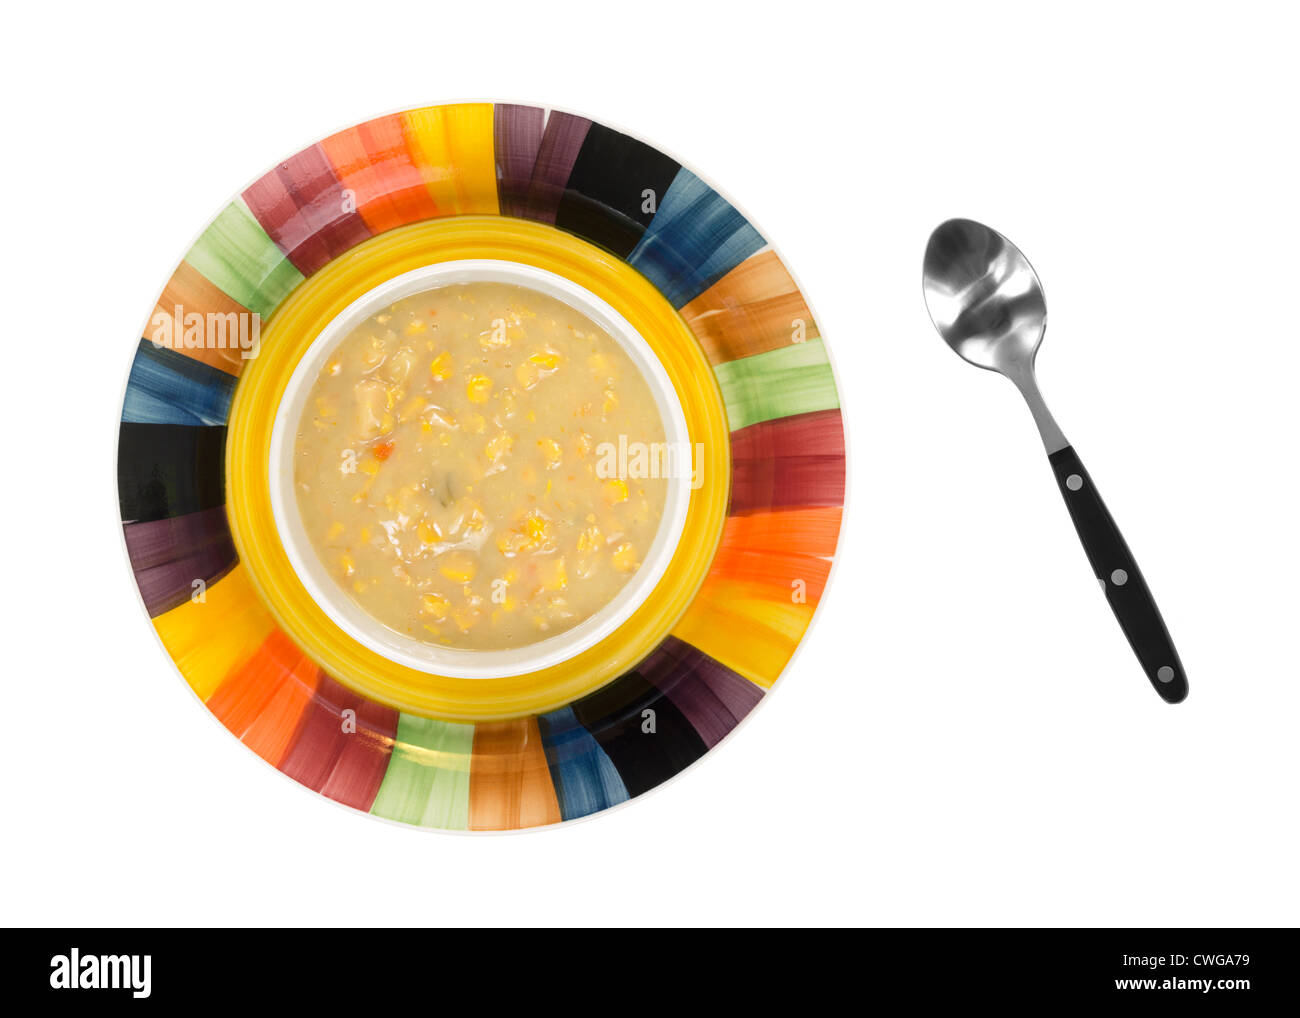 Top view of a bowl of old fashioned thick and creamy corn chowder in bowl on a colorful dish with a soup spoon to the side on a Stock Photo